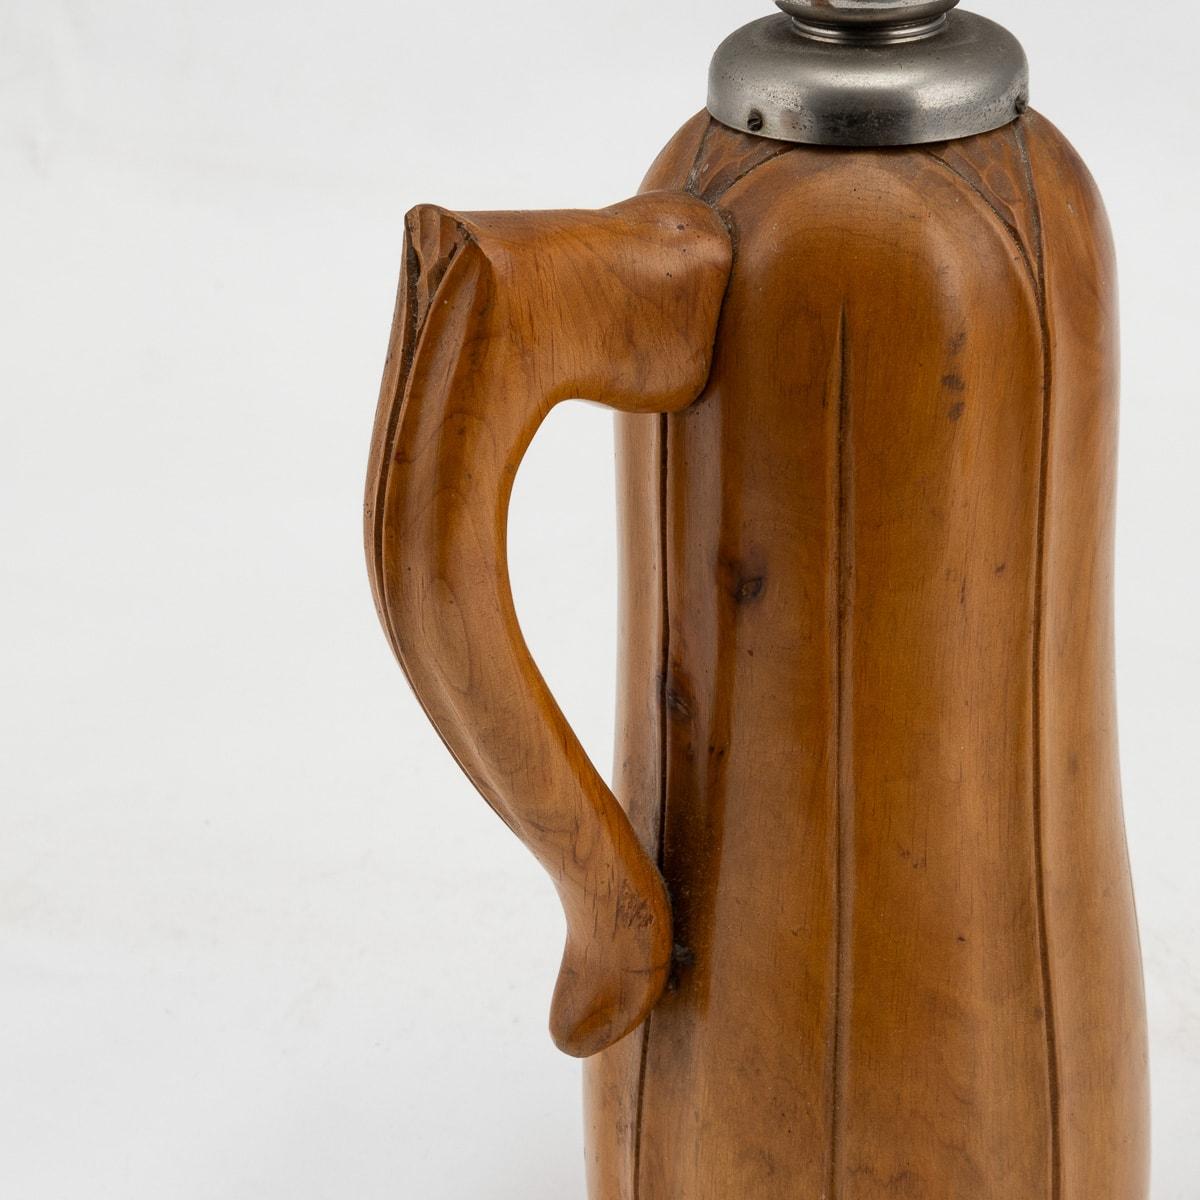 20th Century Italian Wooden Flask By Aldo Tura For Macabo c.1960 For Sale 1